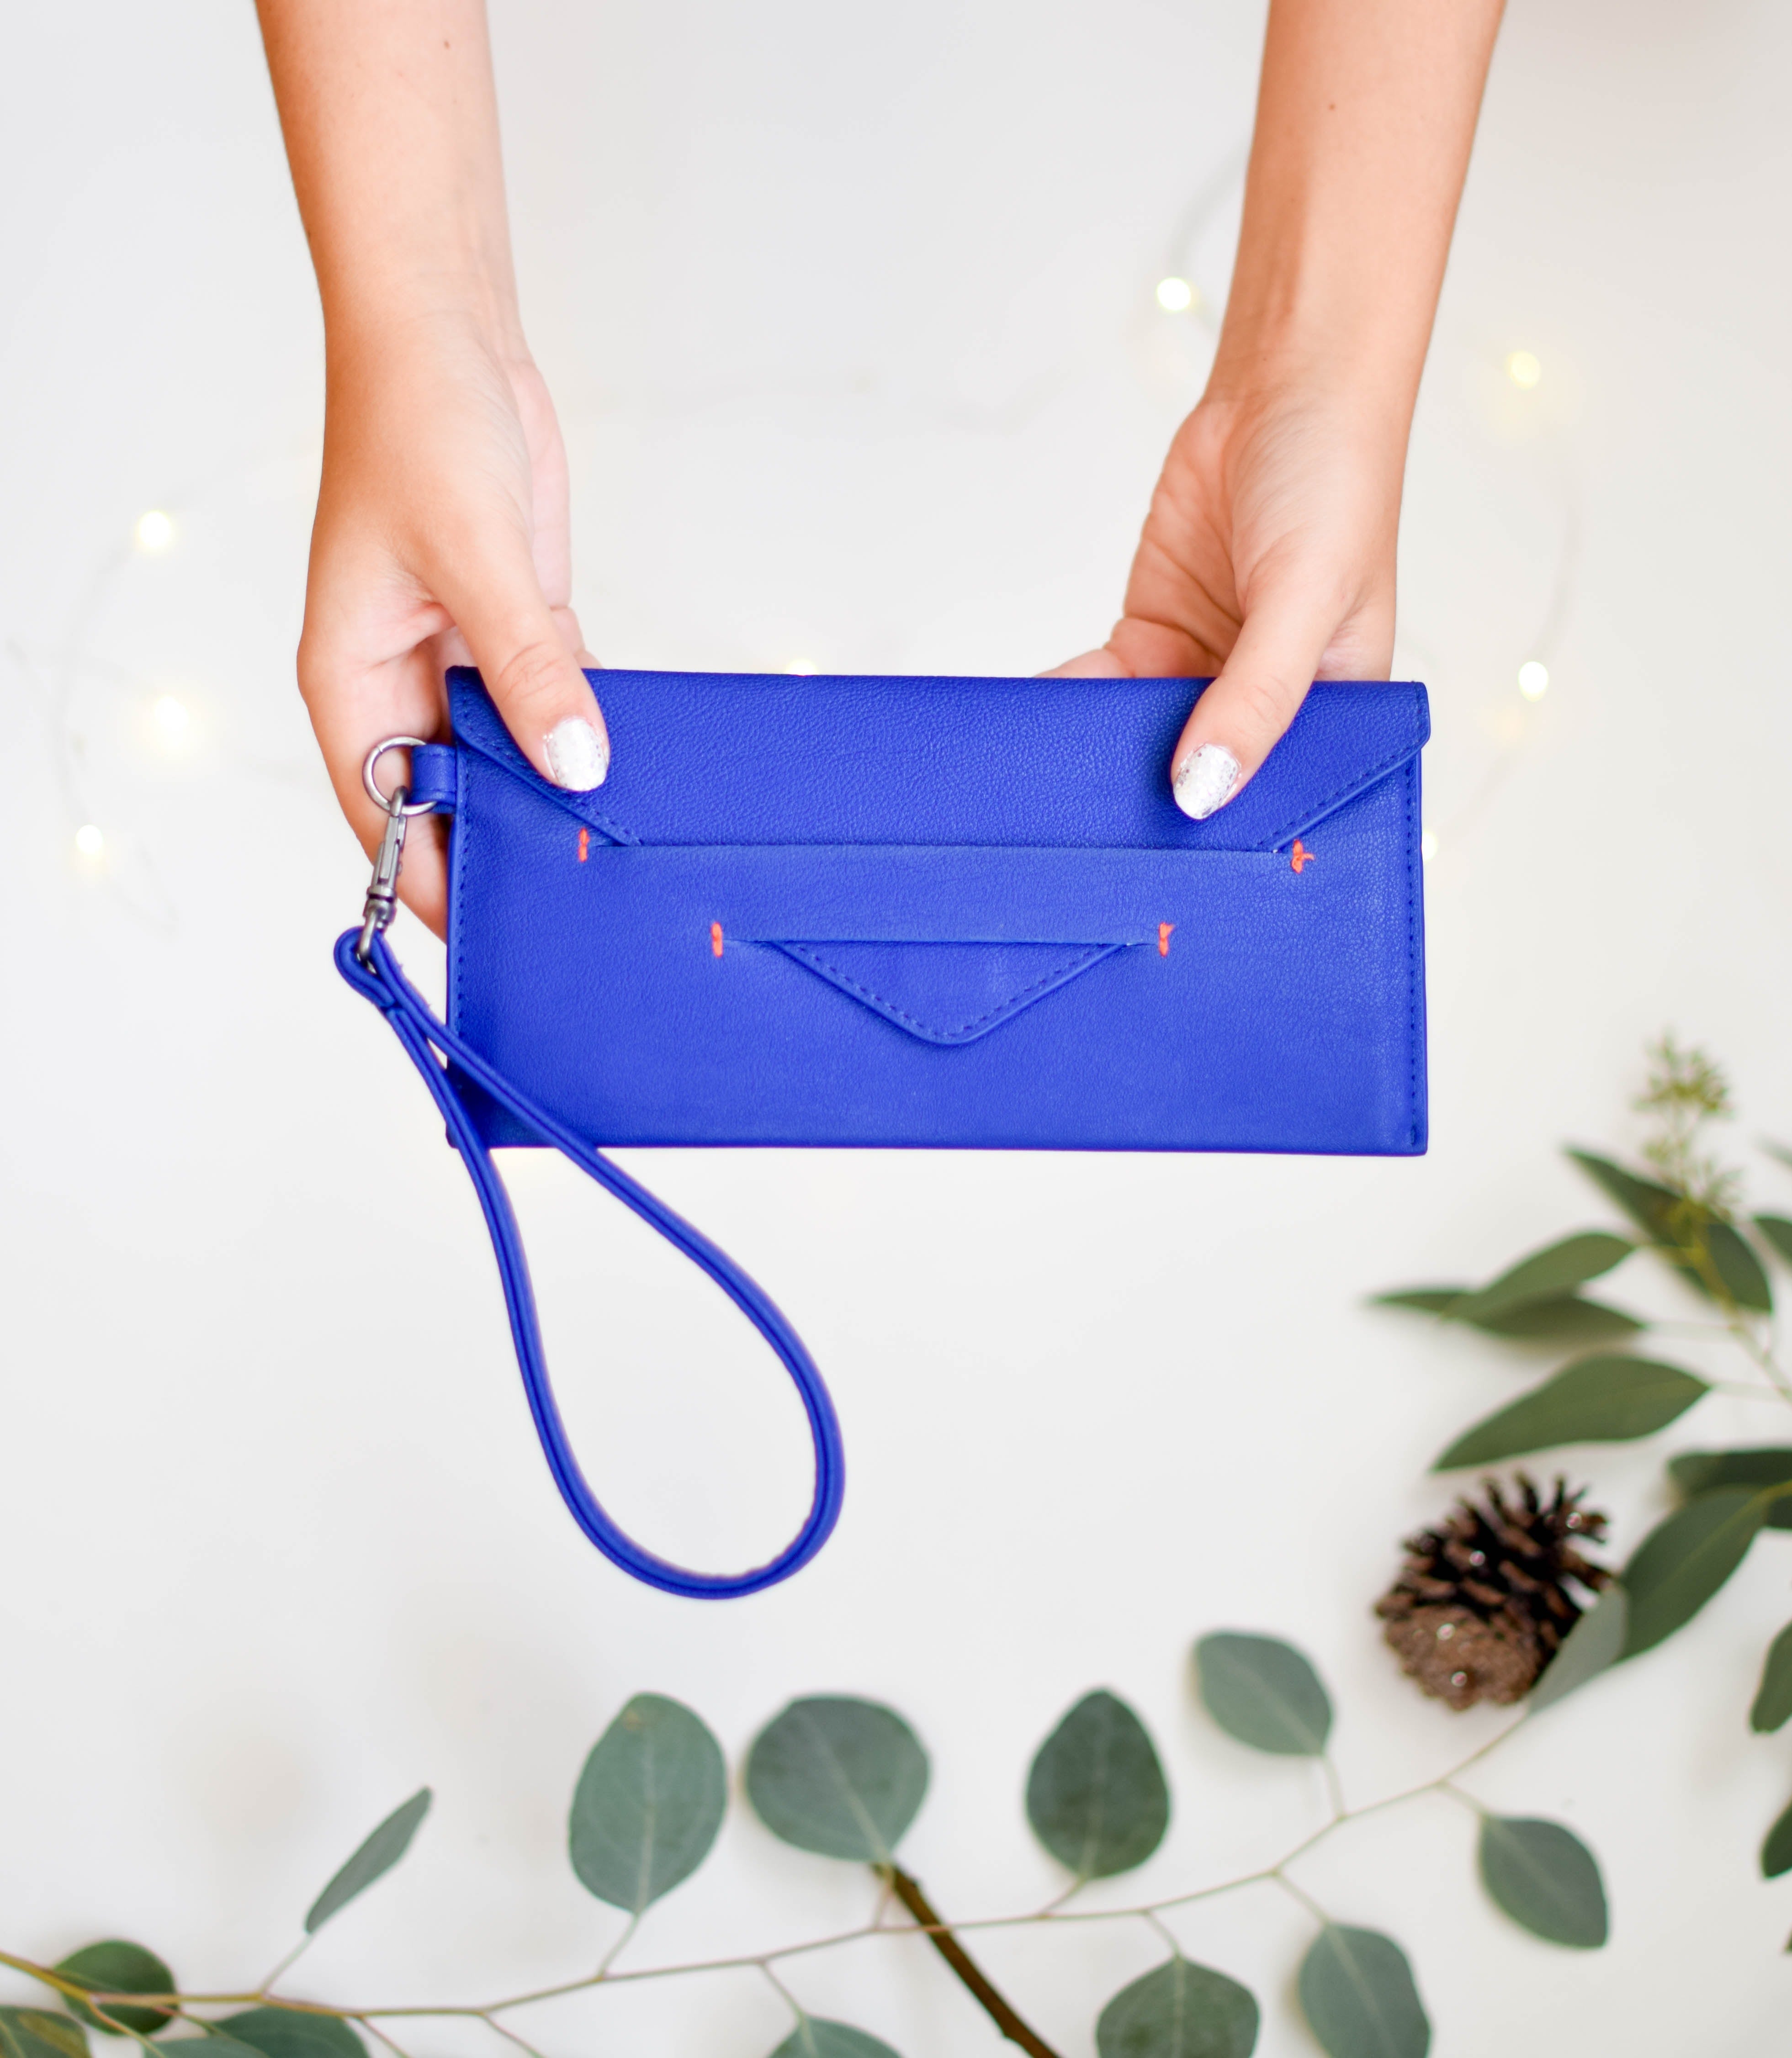 Upgrade your everyday with the Delancey + Smith + Coney Vegan Gift Set. This eco-friendly collection includes a minimalist wallet, sleek card case, and versatile pouch, crafted from premium vegan leather. Sustainable yet stylish, this set makes the perfect gift for the modern minimalist in your life. Shop now and embrace conscious fashion!